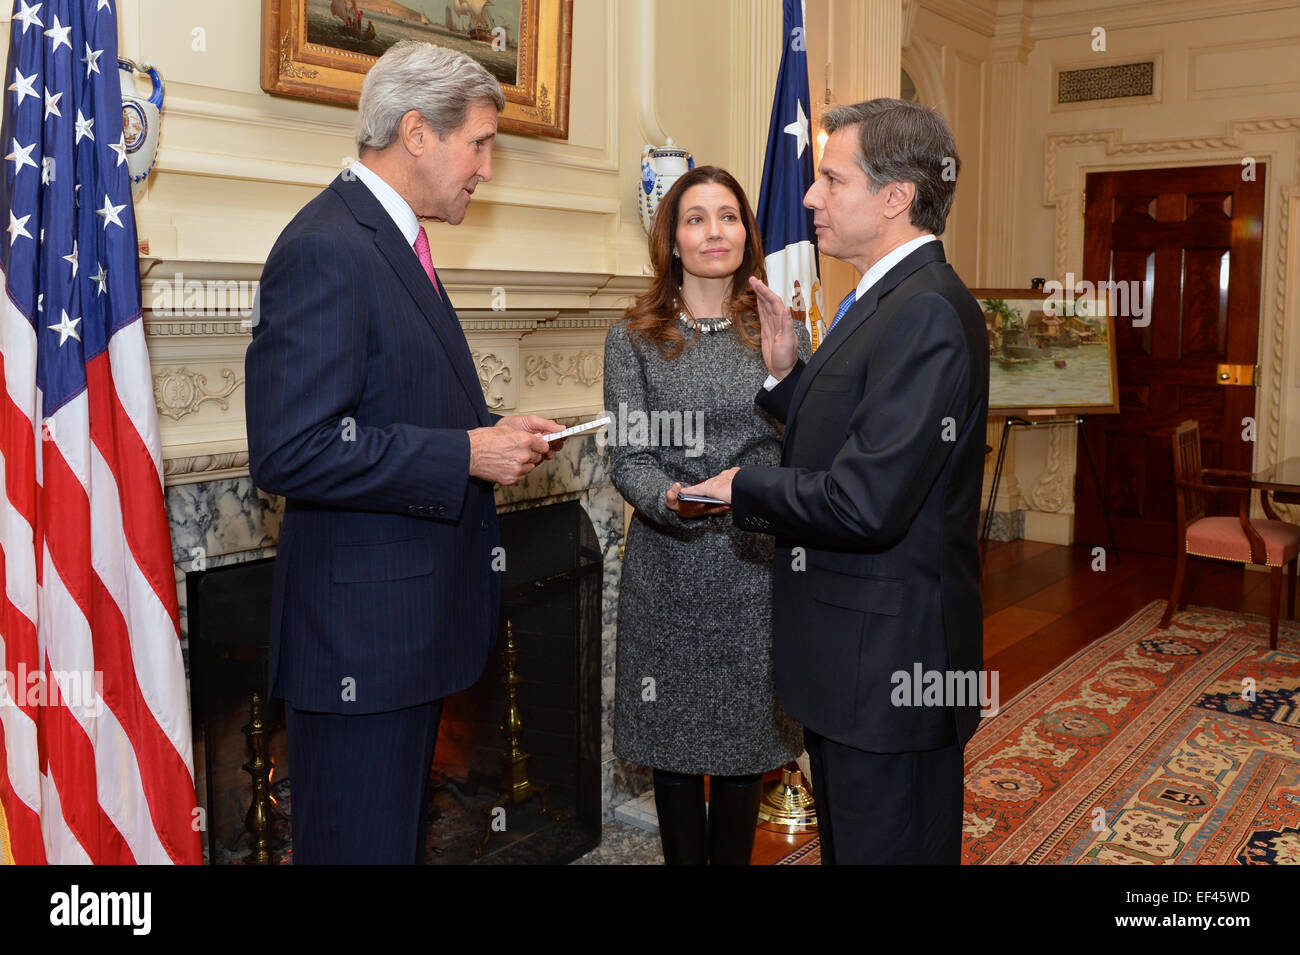 With his wife, Assistant Secretary of State for Educational and Cultural Affairs Evan Ryan, looking on, U.S. Secretary of State John Kerry swears in Antony Blinken as the new Deputy Secretary of State, at the U.S. Department of State in Washington, D.C., on January 9, 2015. Stock Photo